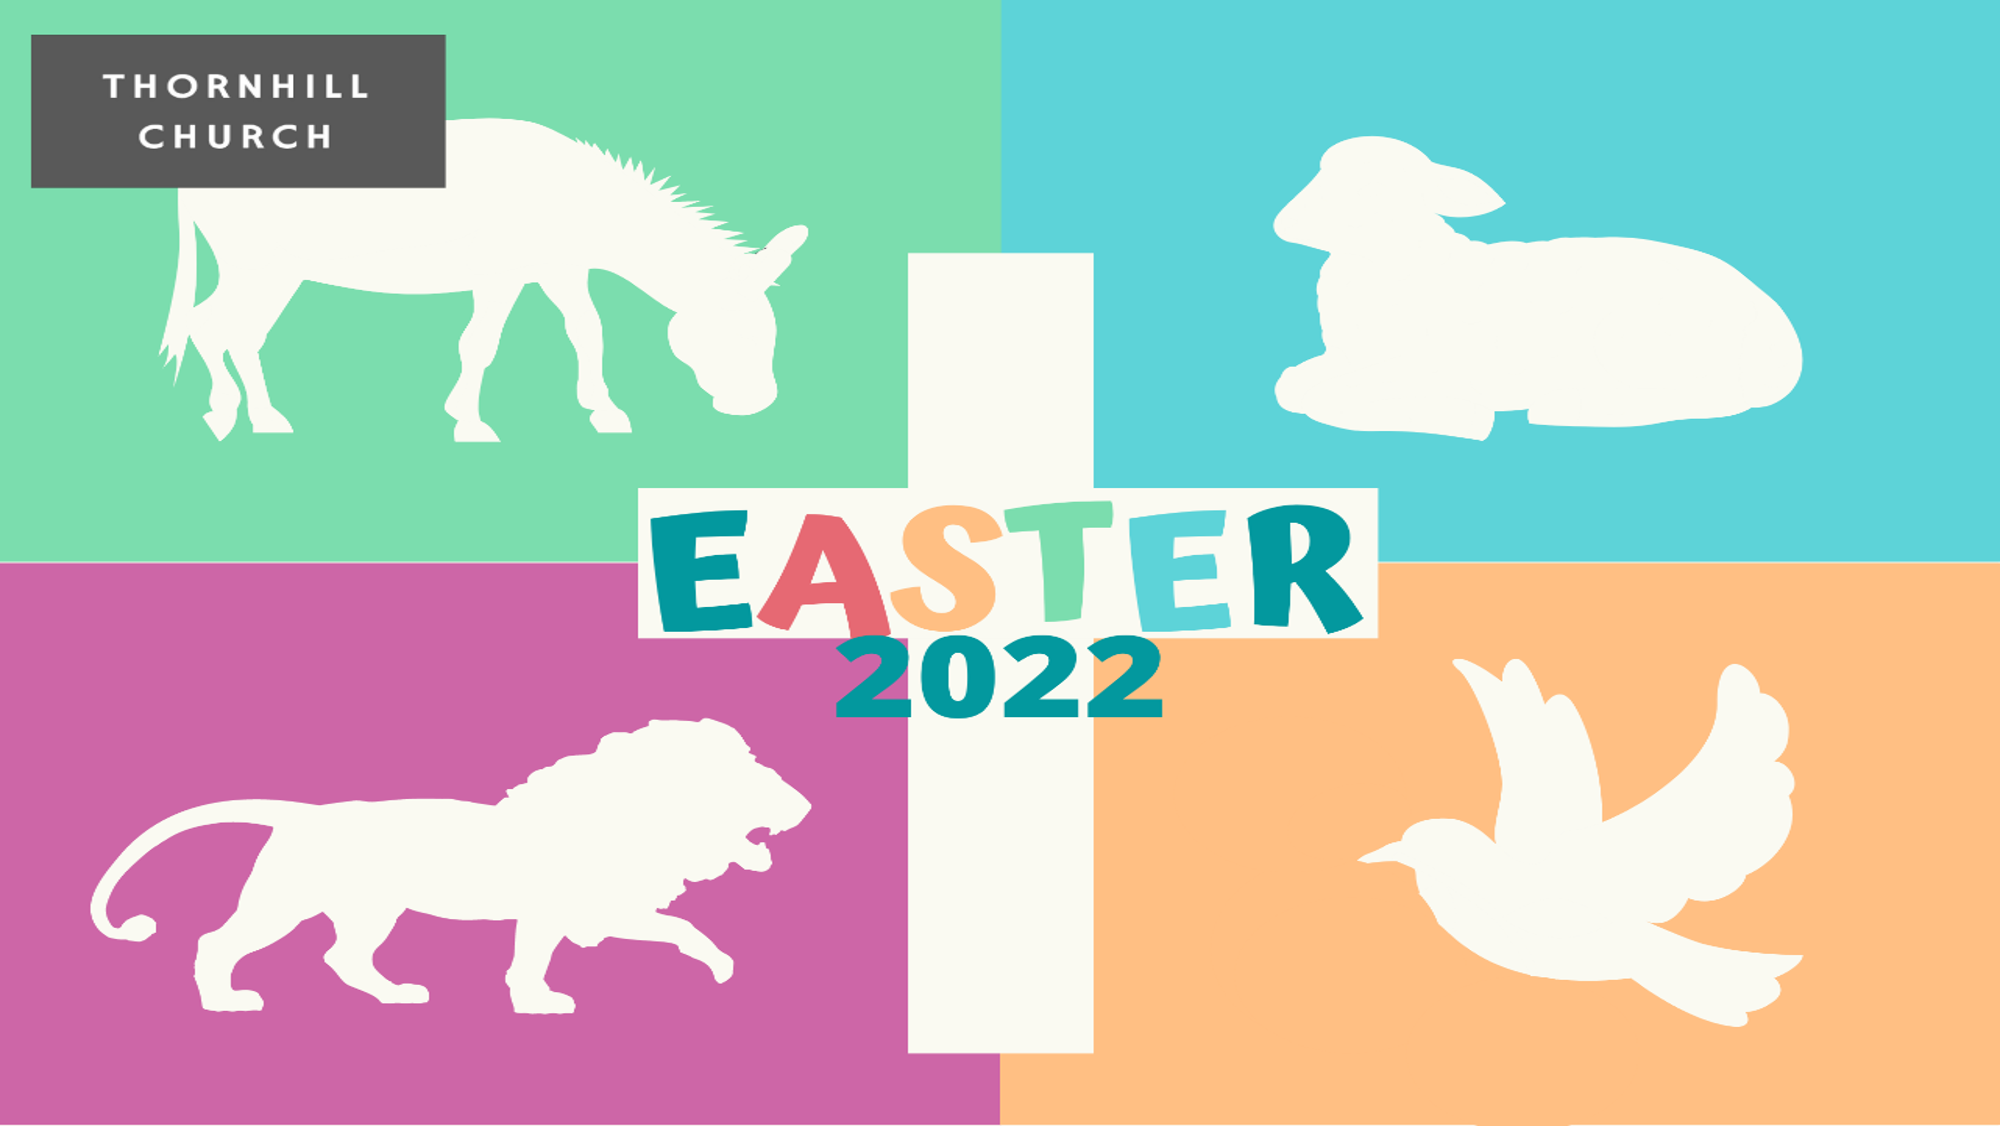 Easter 2022 at Thornhill Church